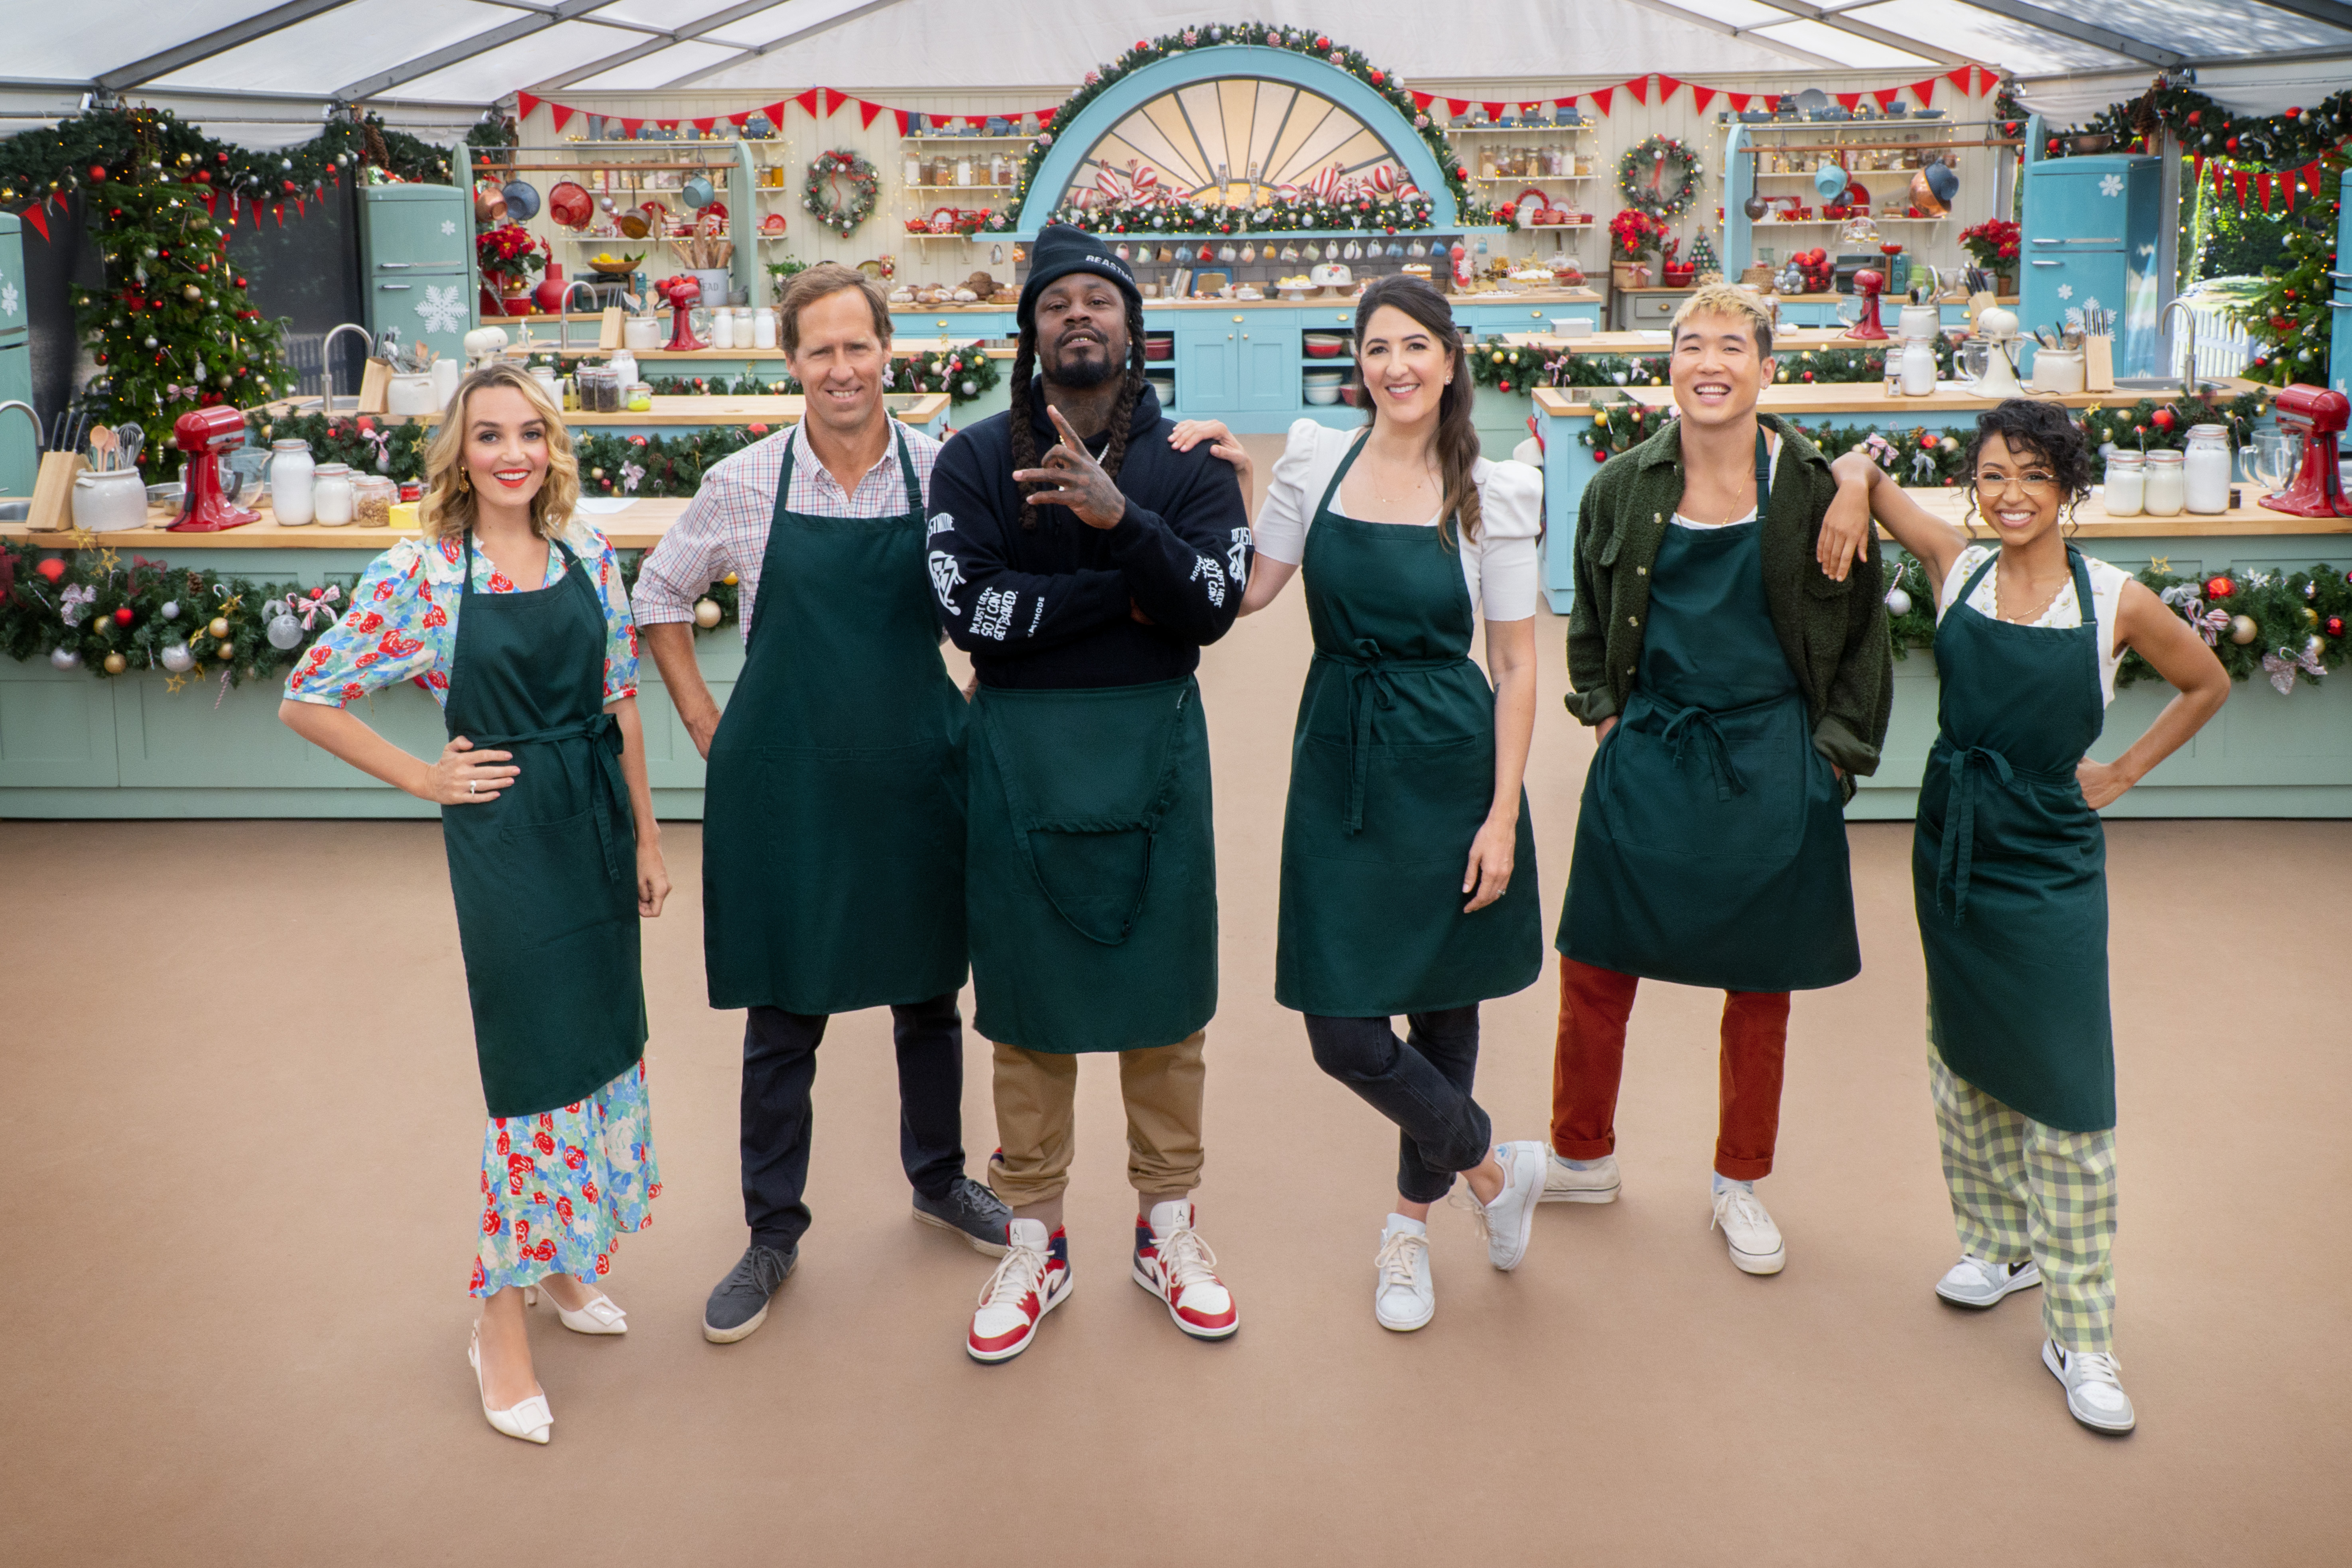 Cover image for  article: Roku's "The Great American Baking Show: Celebrity Holiday" Is All Sweets, Merriment and Cheer